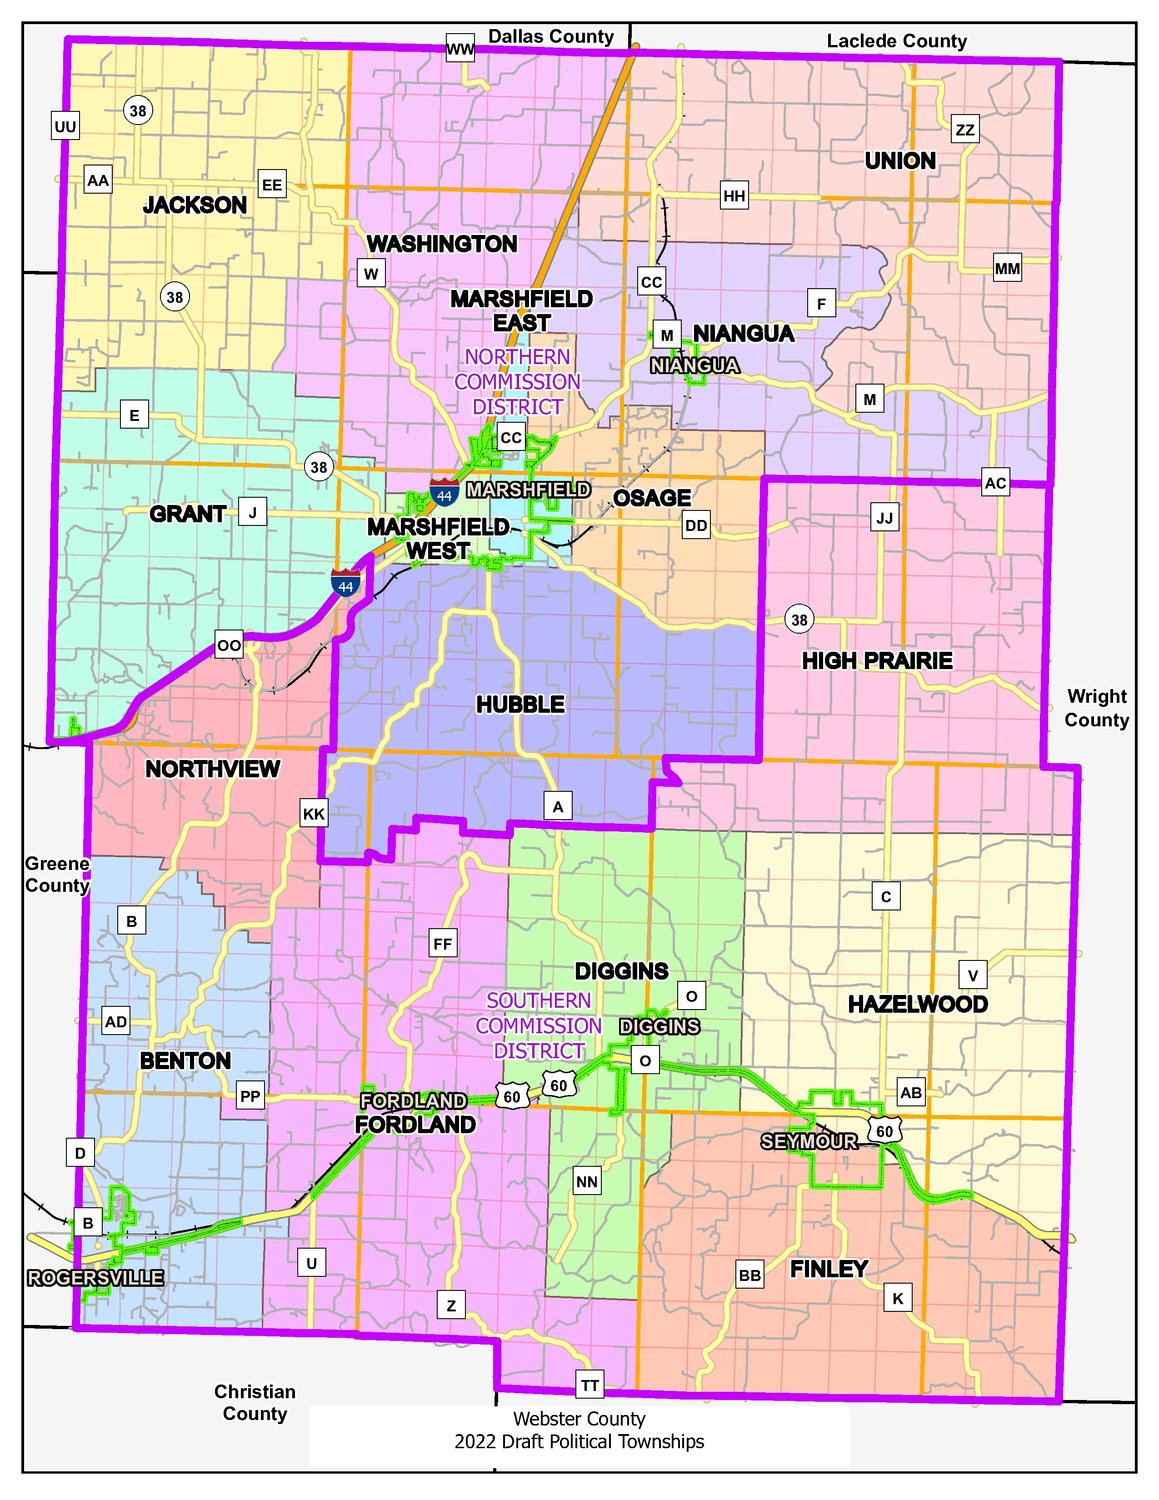 Thanks to the hard work of Webster County Clerk Stan Whitehurst and Deputy Clerk Missy Pickel, here are the new 2022 Voting Districts (Townships) for Webster County. Residents located in Osage, Jackson, Washington, and Hubble are encouraged to verify their voting location before Aug. 2. If unsure about the voting location, please call the County Clerk’s office at 417-859-8683 (VOTE) or visit www.webstercountymo.gov/polling-location-list